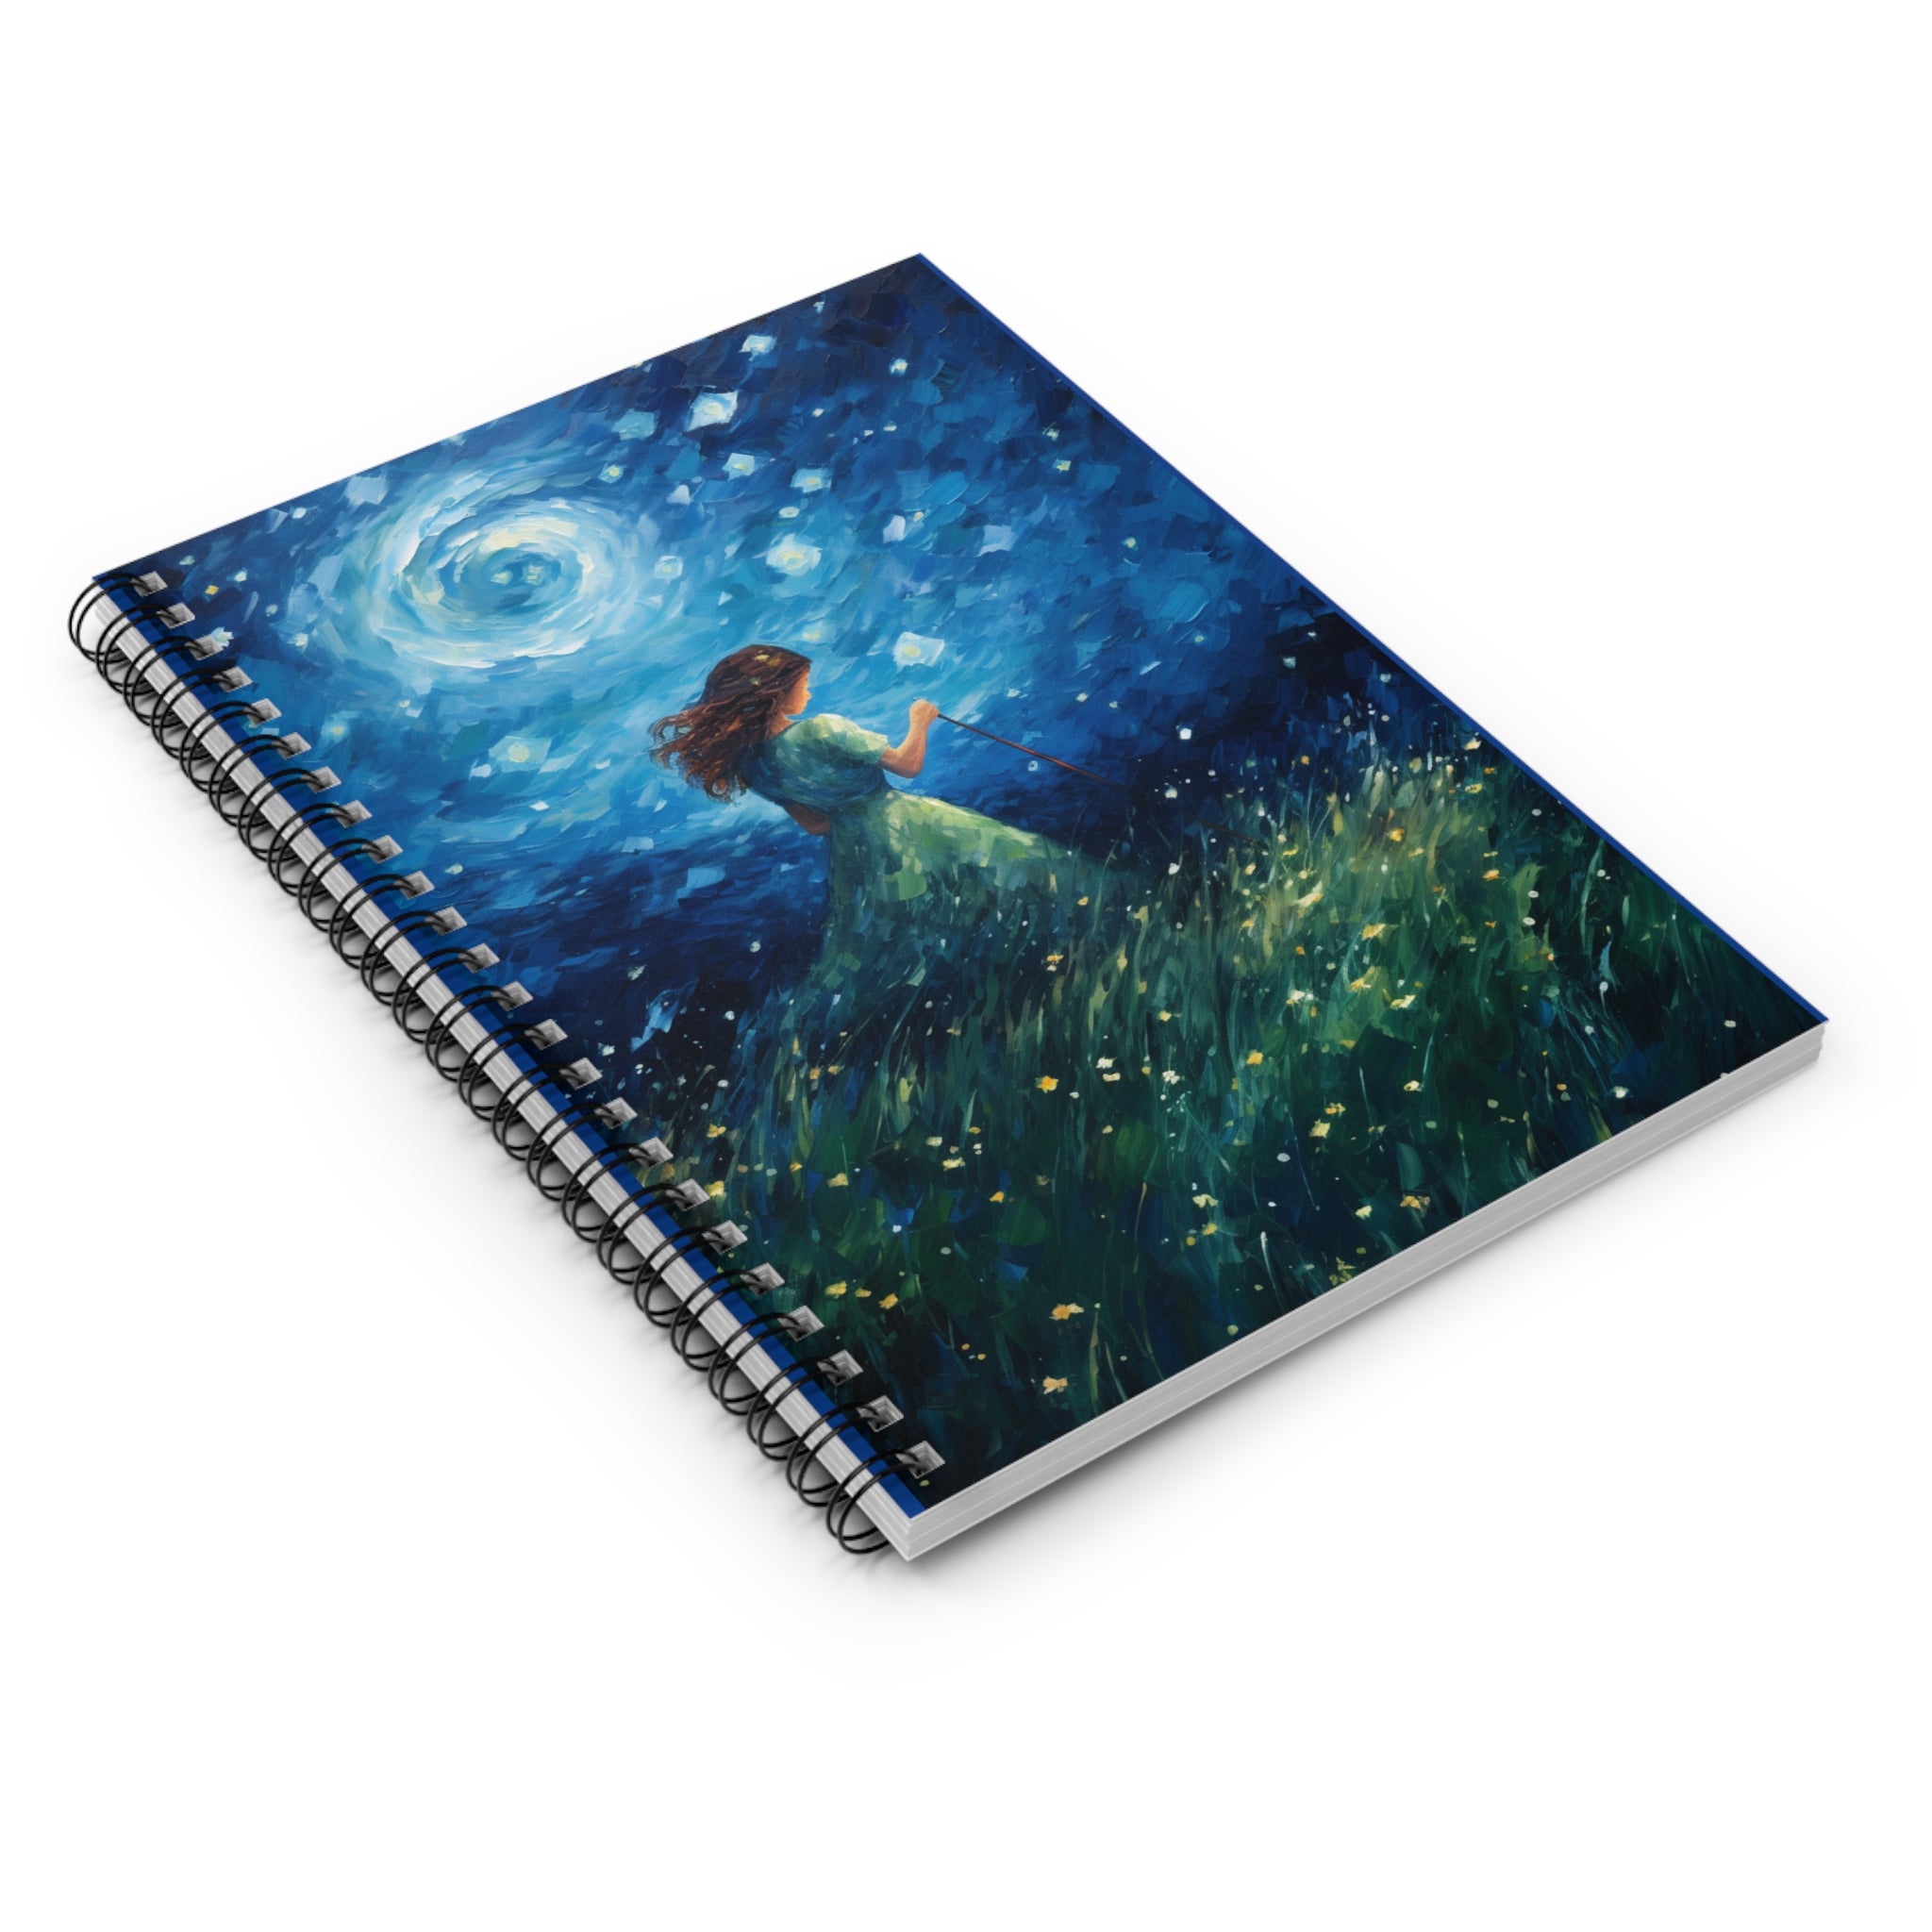 Starry Skies - Spiral Notebook - Ruled Line - Spruced Roost